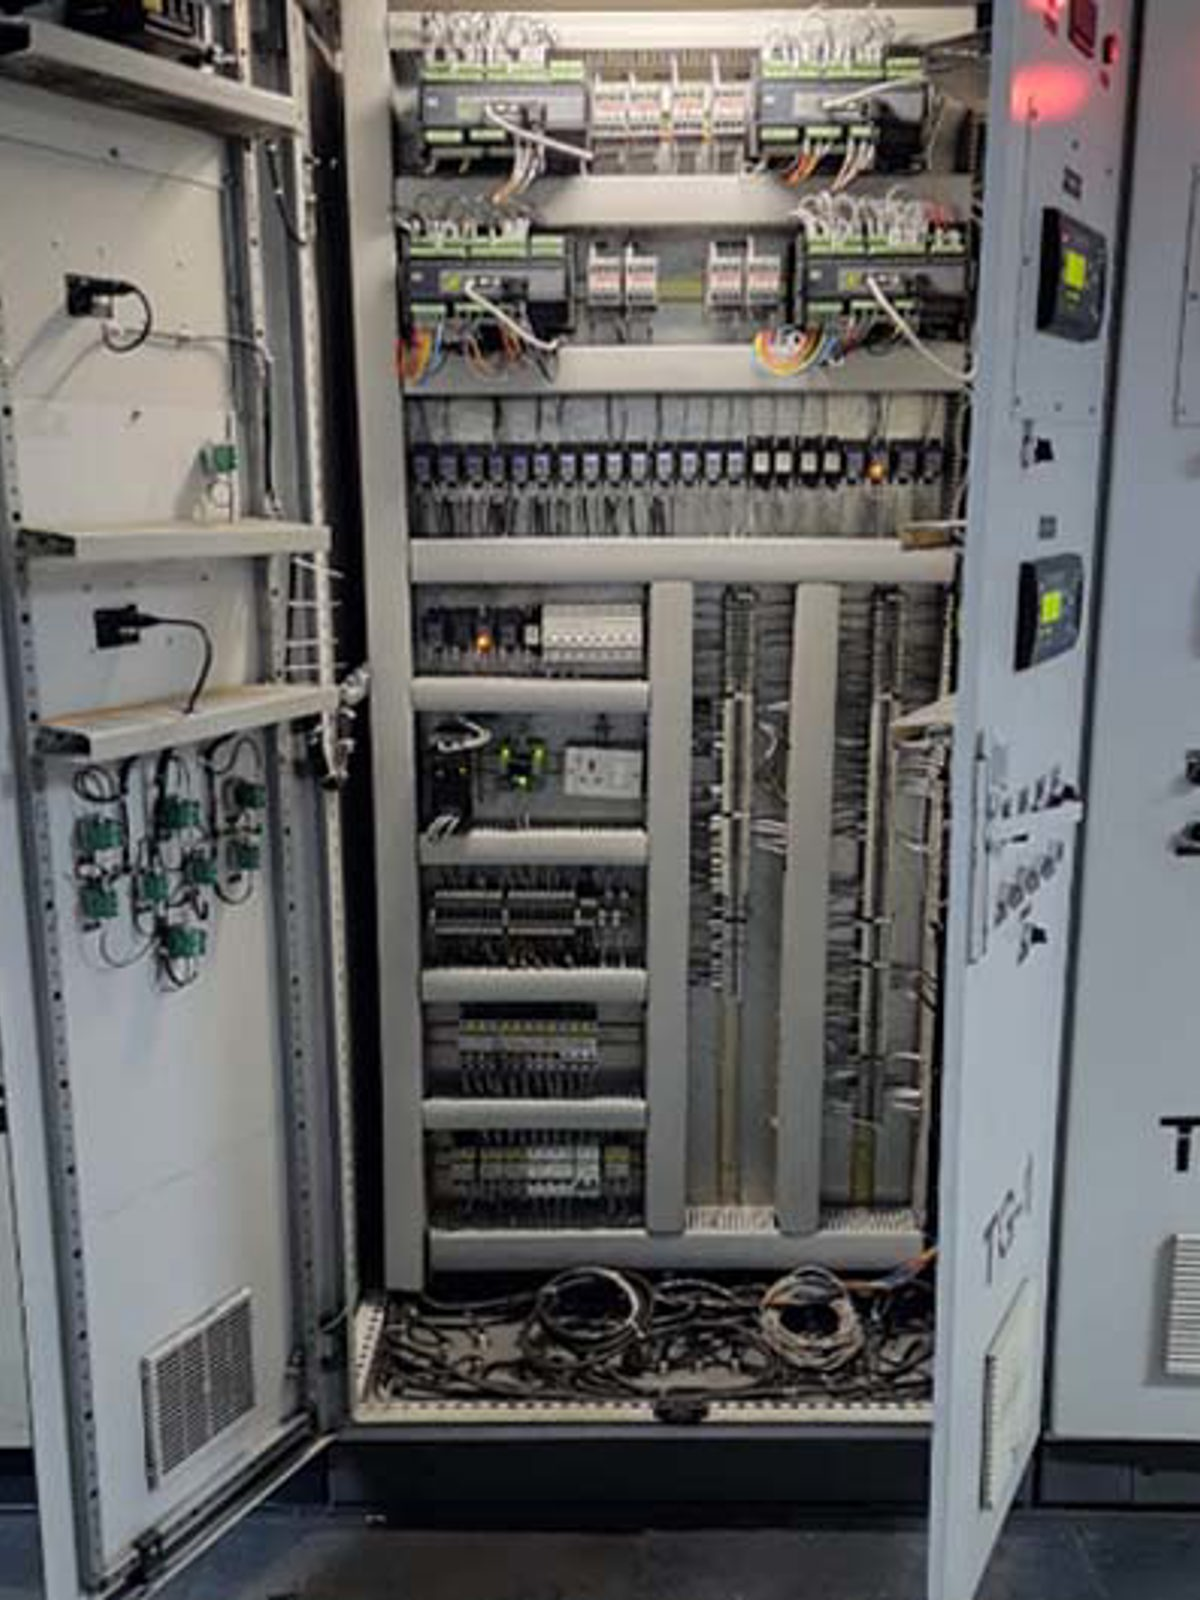 DEIF AGC-4 controllers in a switchboard at Singhal Enterprises